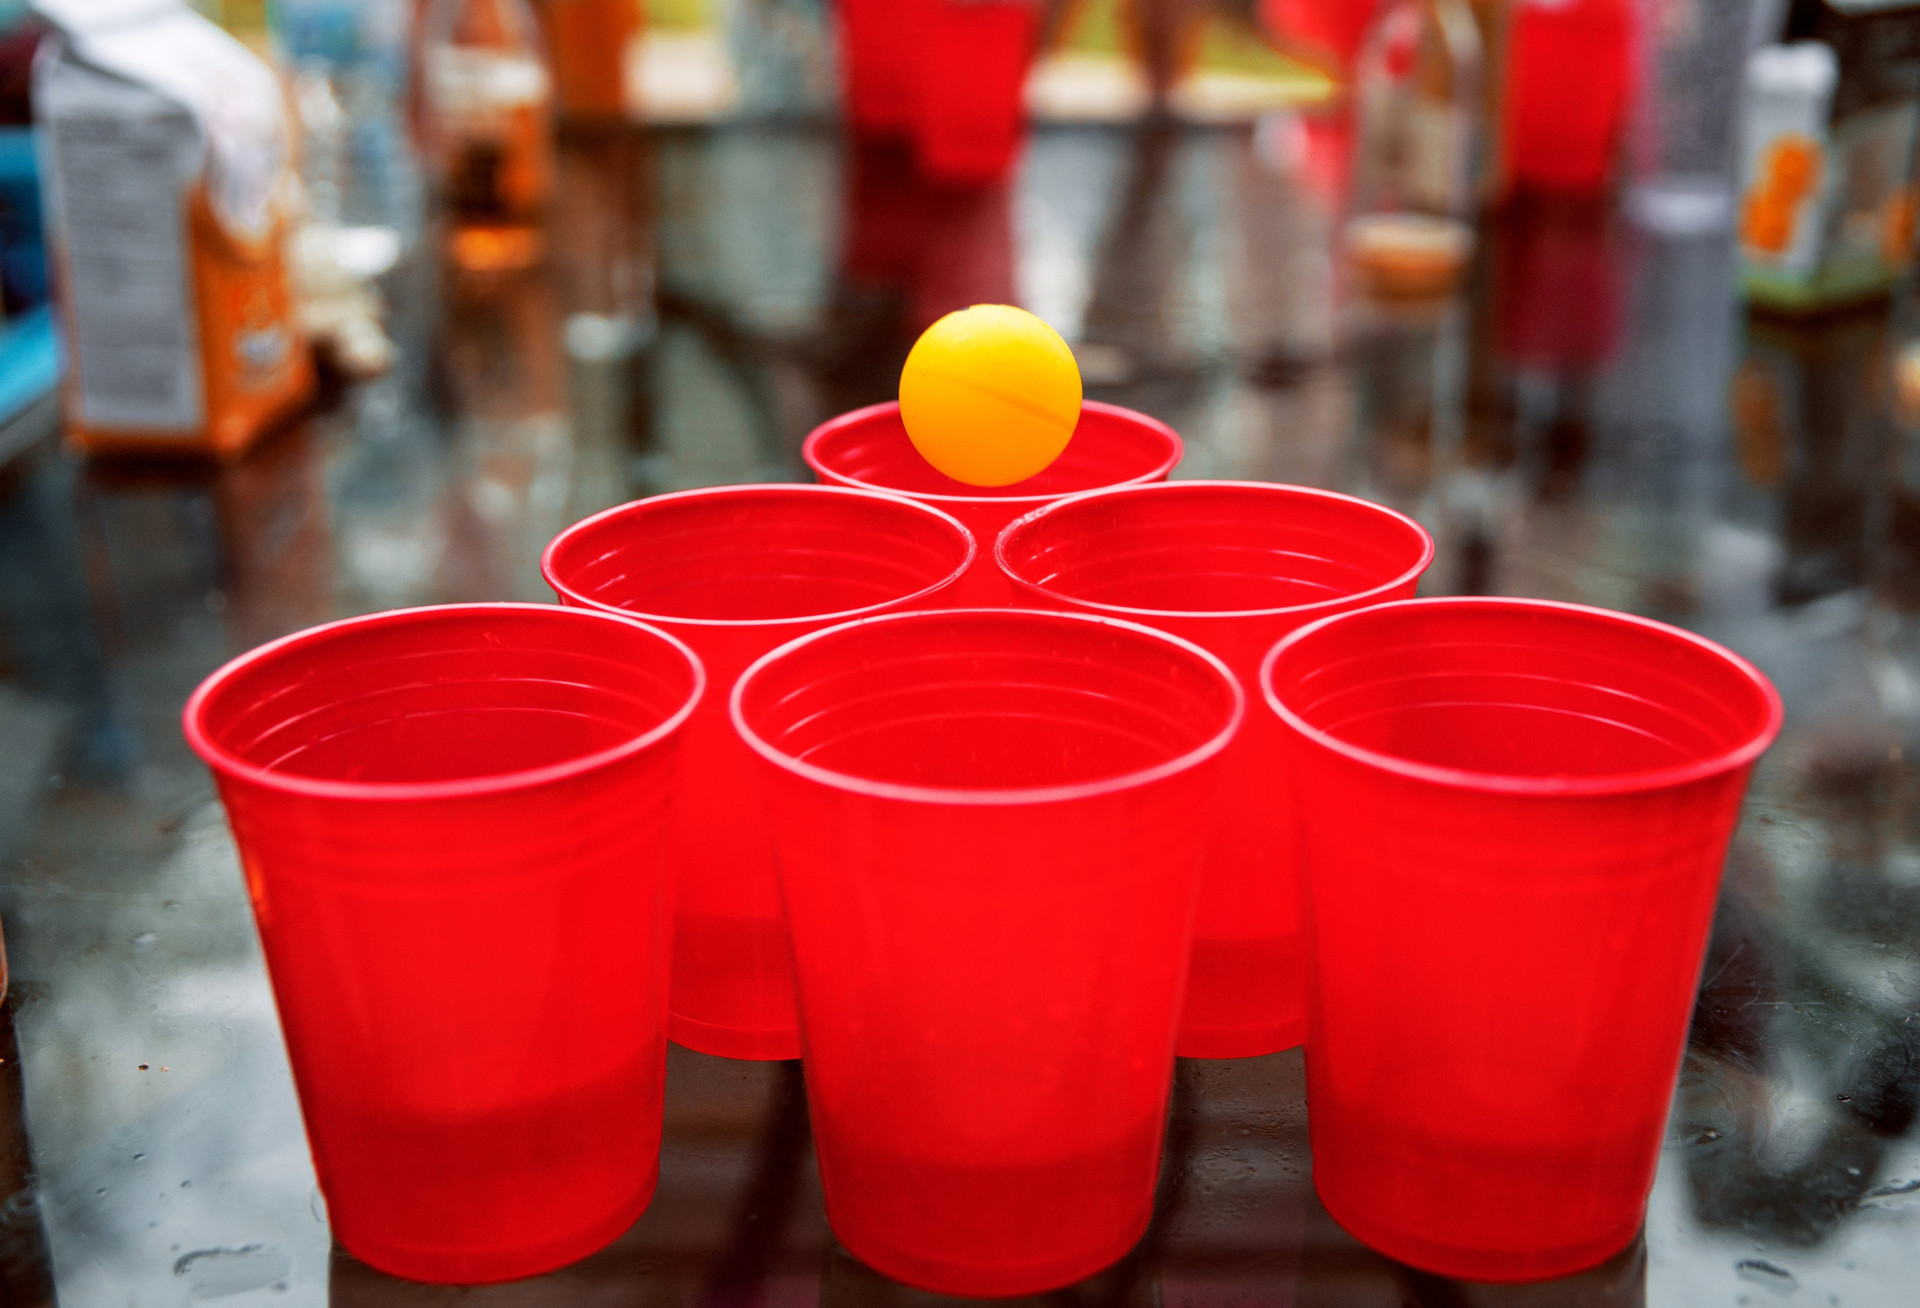 the-best-and-most-fun-games-to-play-at-home-with-friends-erasmus-tips